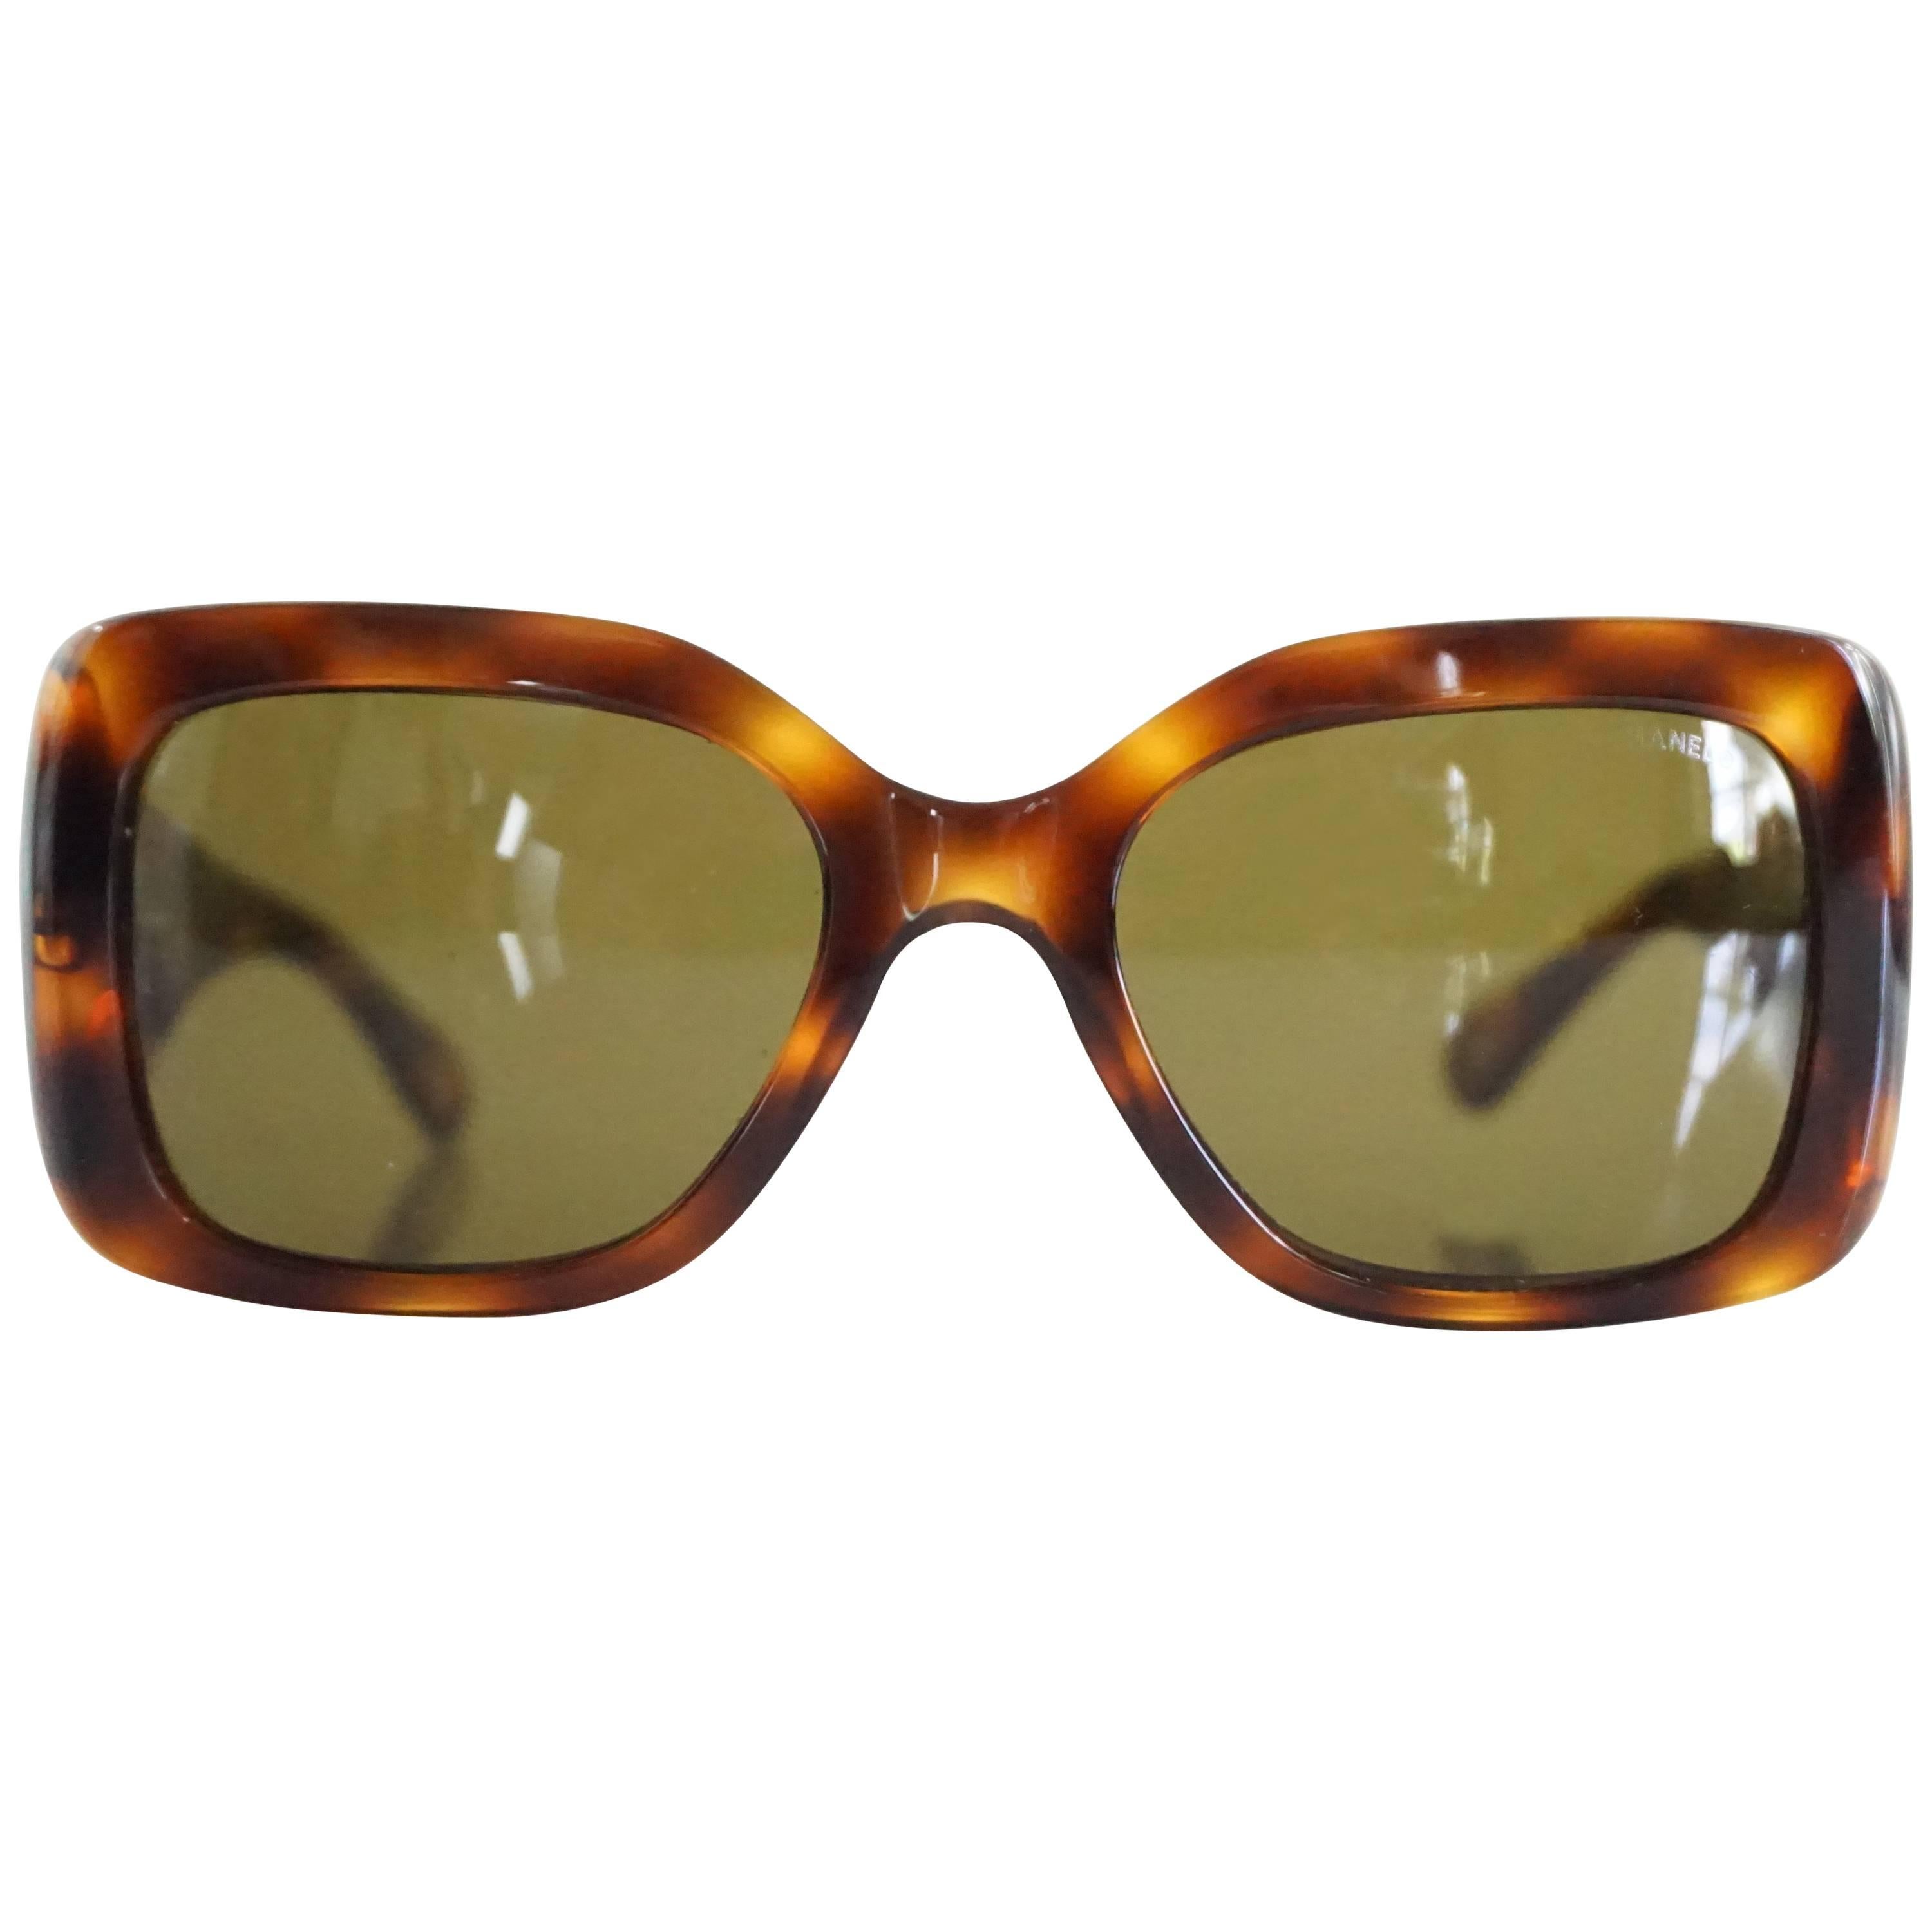 Chanel Tortoise Shell Sunglasses with Quilted Sides